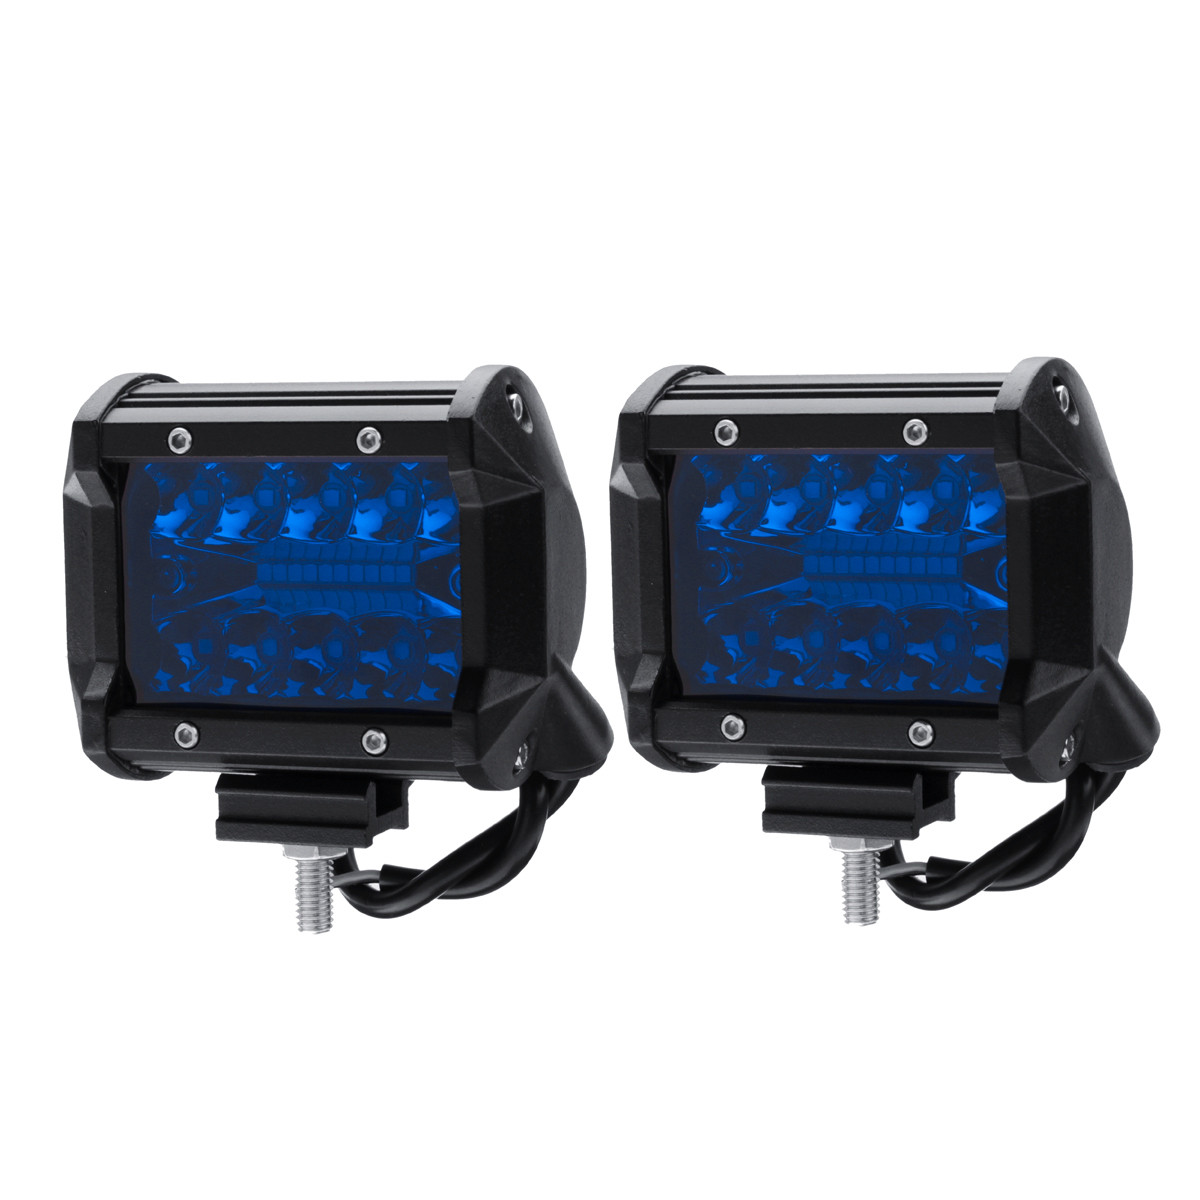 4'' Inch Tri-Row 60W 720LM 20LED Work Light Bar Flood Spot Combo Fog Lamp Blue for Offroad SUV